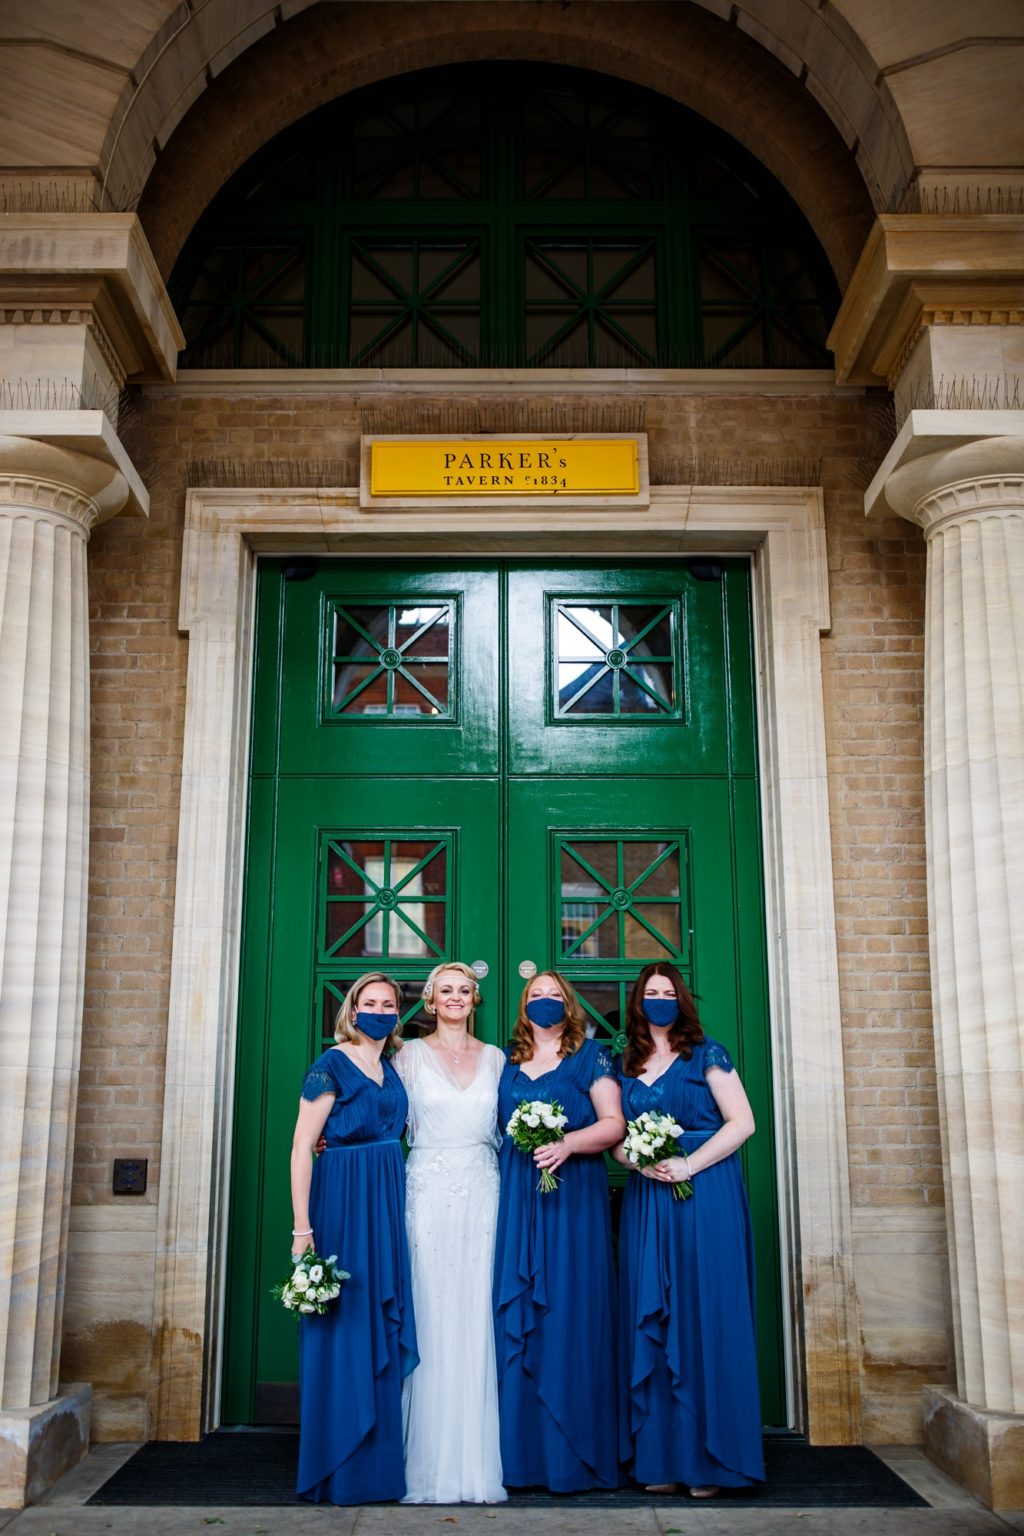 Intimate Micro Wedding At Cambridge Register Office With 1920s Inspired Wedding Dress